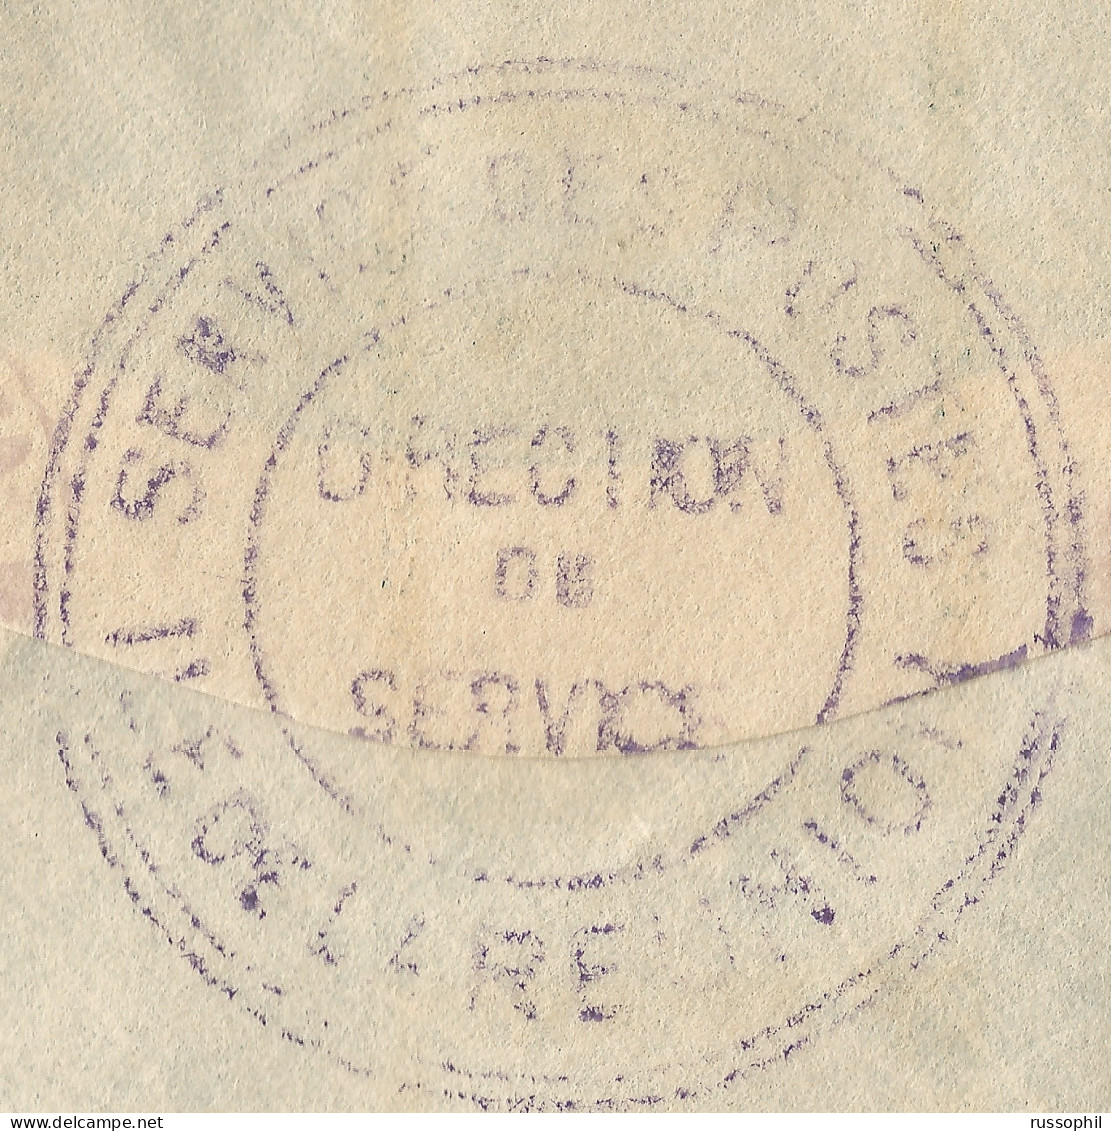 REUNION - 30 FR 60 CENT.  4 STAMP FRANKING ON REGISTERED AIR COVER FROM SAINT DENIS TO THE USA - 1945 - Lettres & Documents